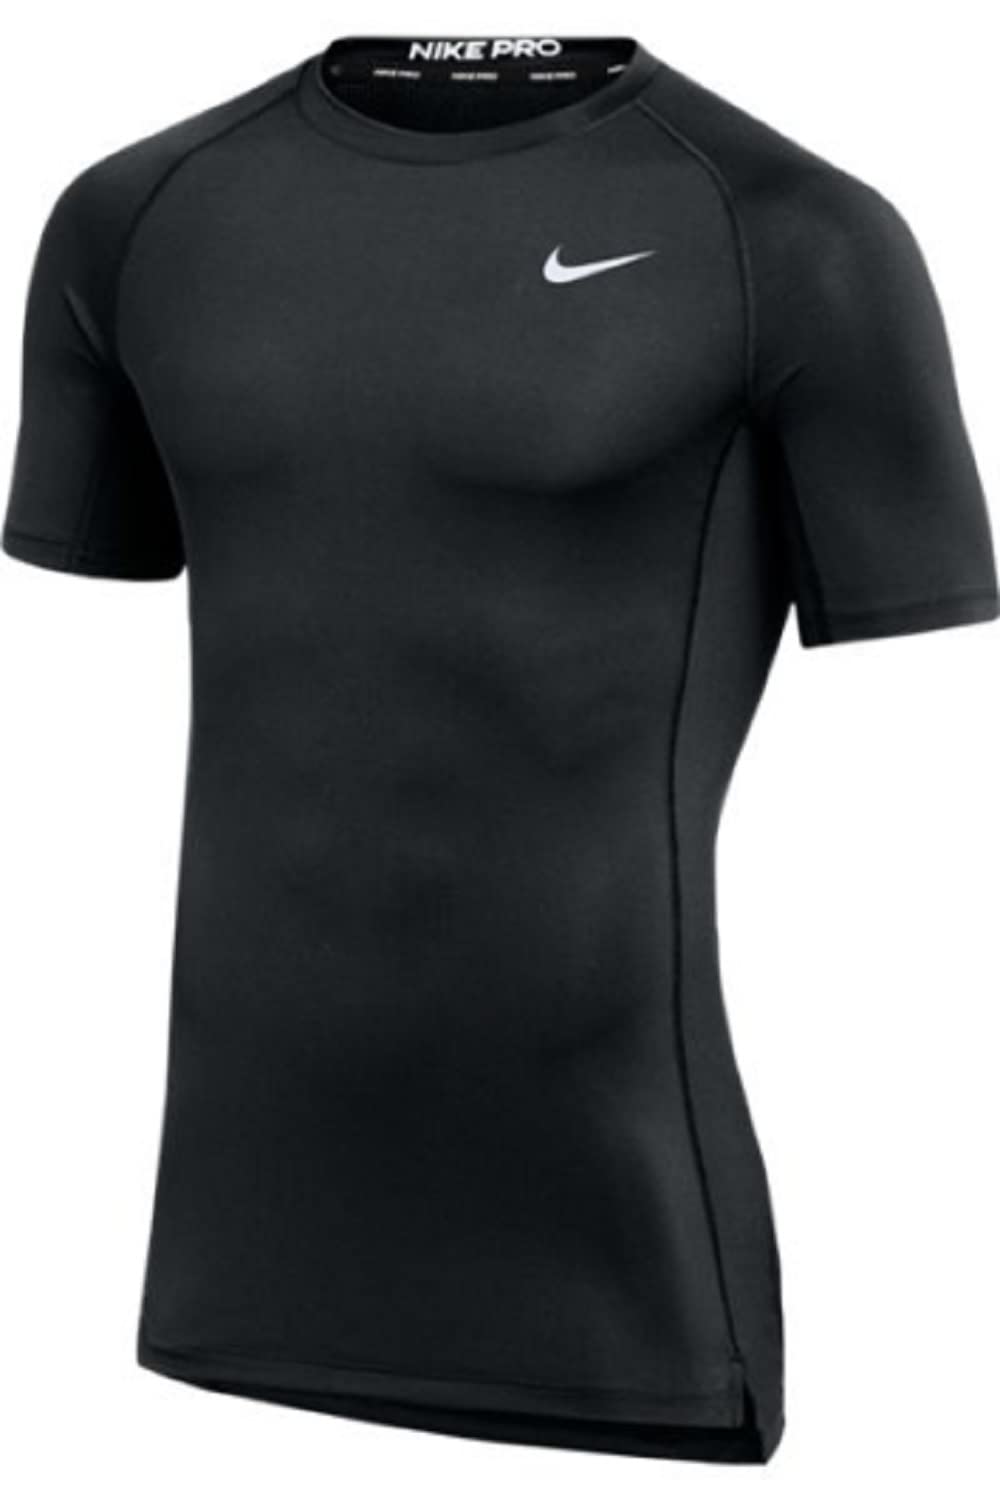 Nike Mens Pro Fitted Short Sleeve Training Tee